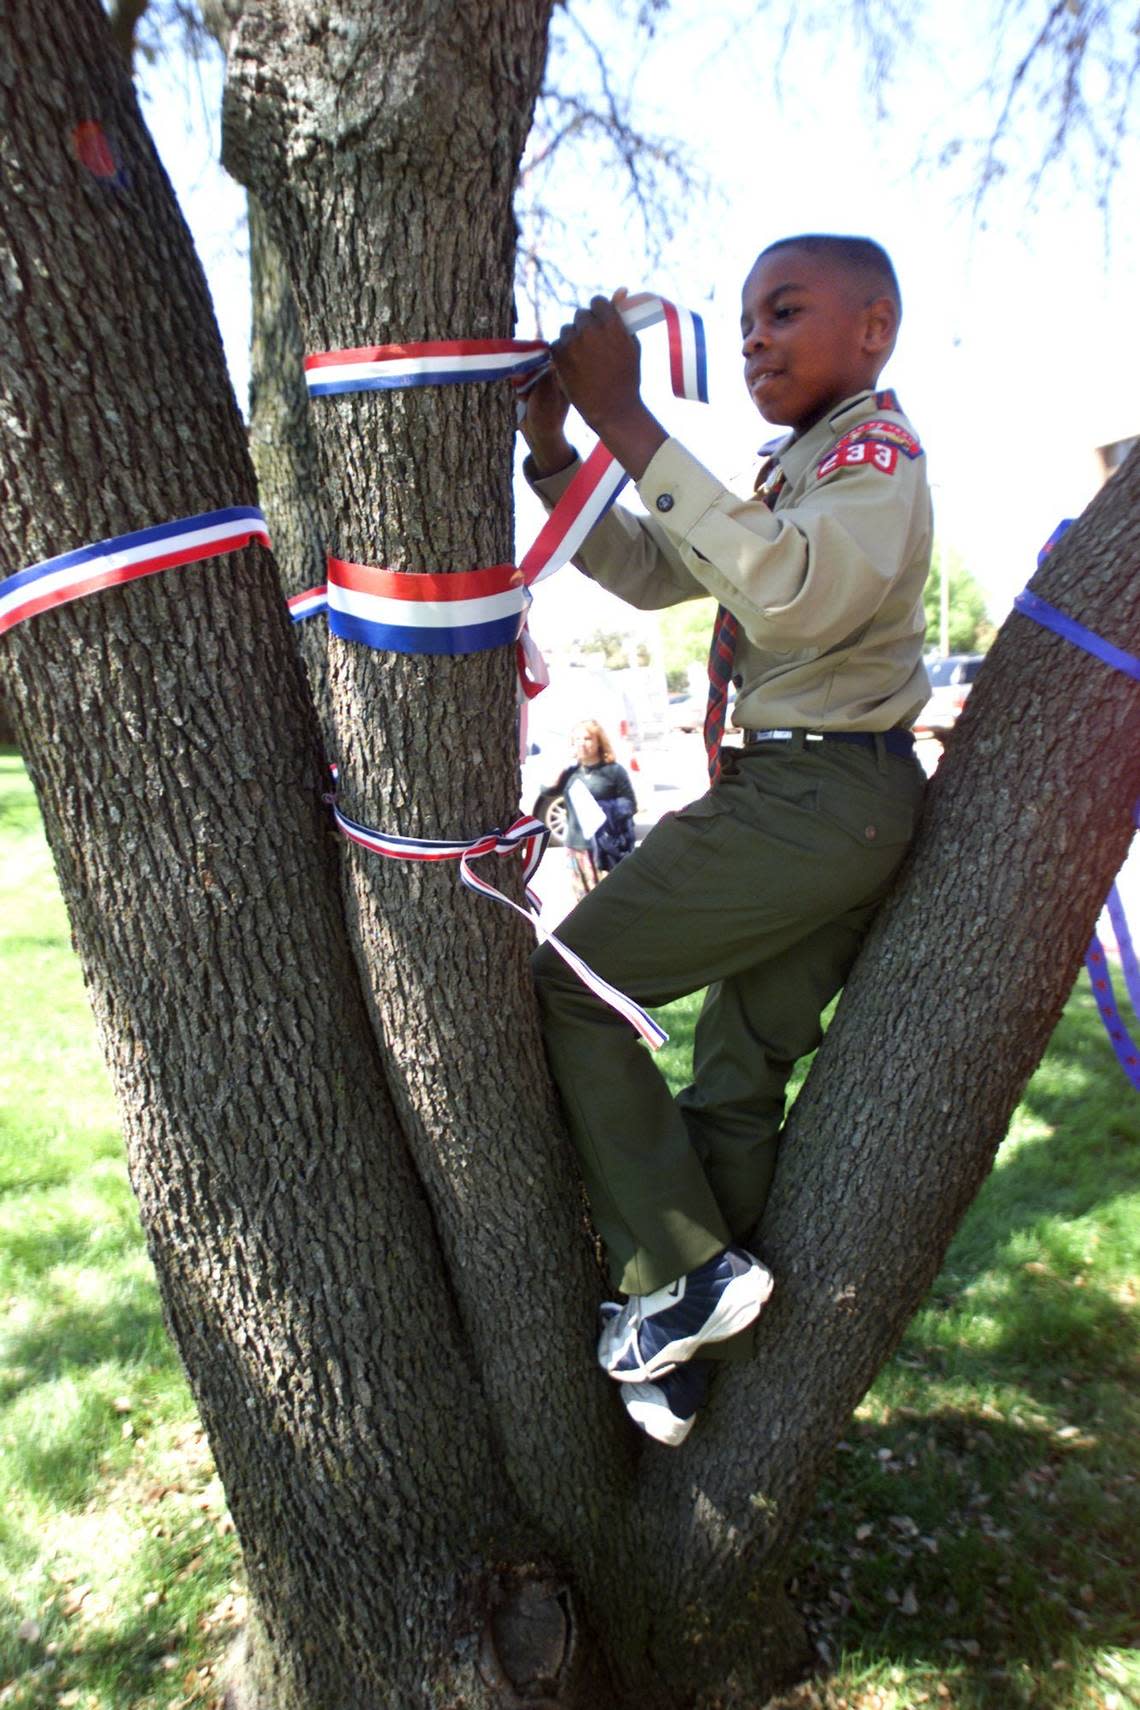 March 24, 2003: L.J. Hopkins, 9, a Webelo, was one of a few youths that started the initiative of tying patriotic ribbons to trees as a show of support for our troops at the Boy Scouts of America National Headquarters in Irving. M.L. GRAY/Fort Worth Star-Telegram